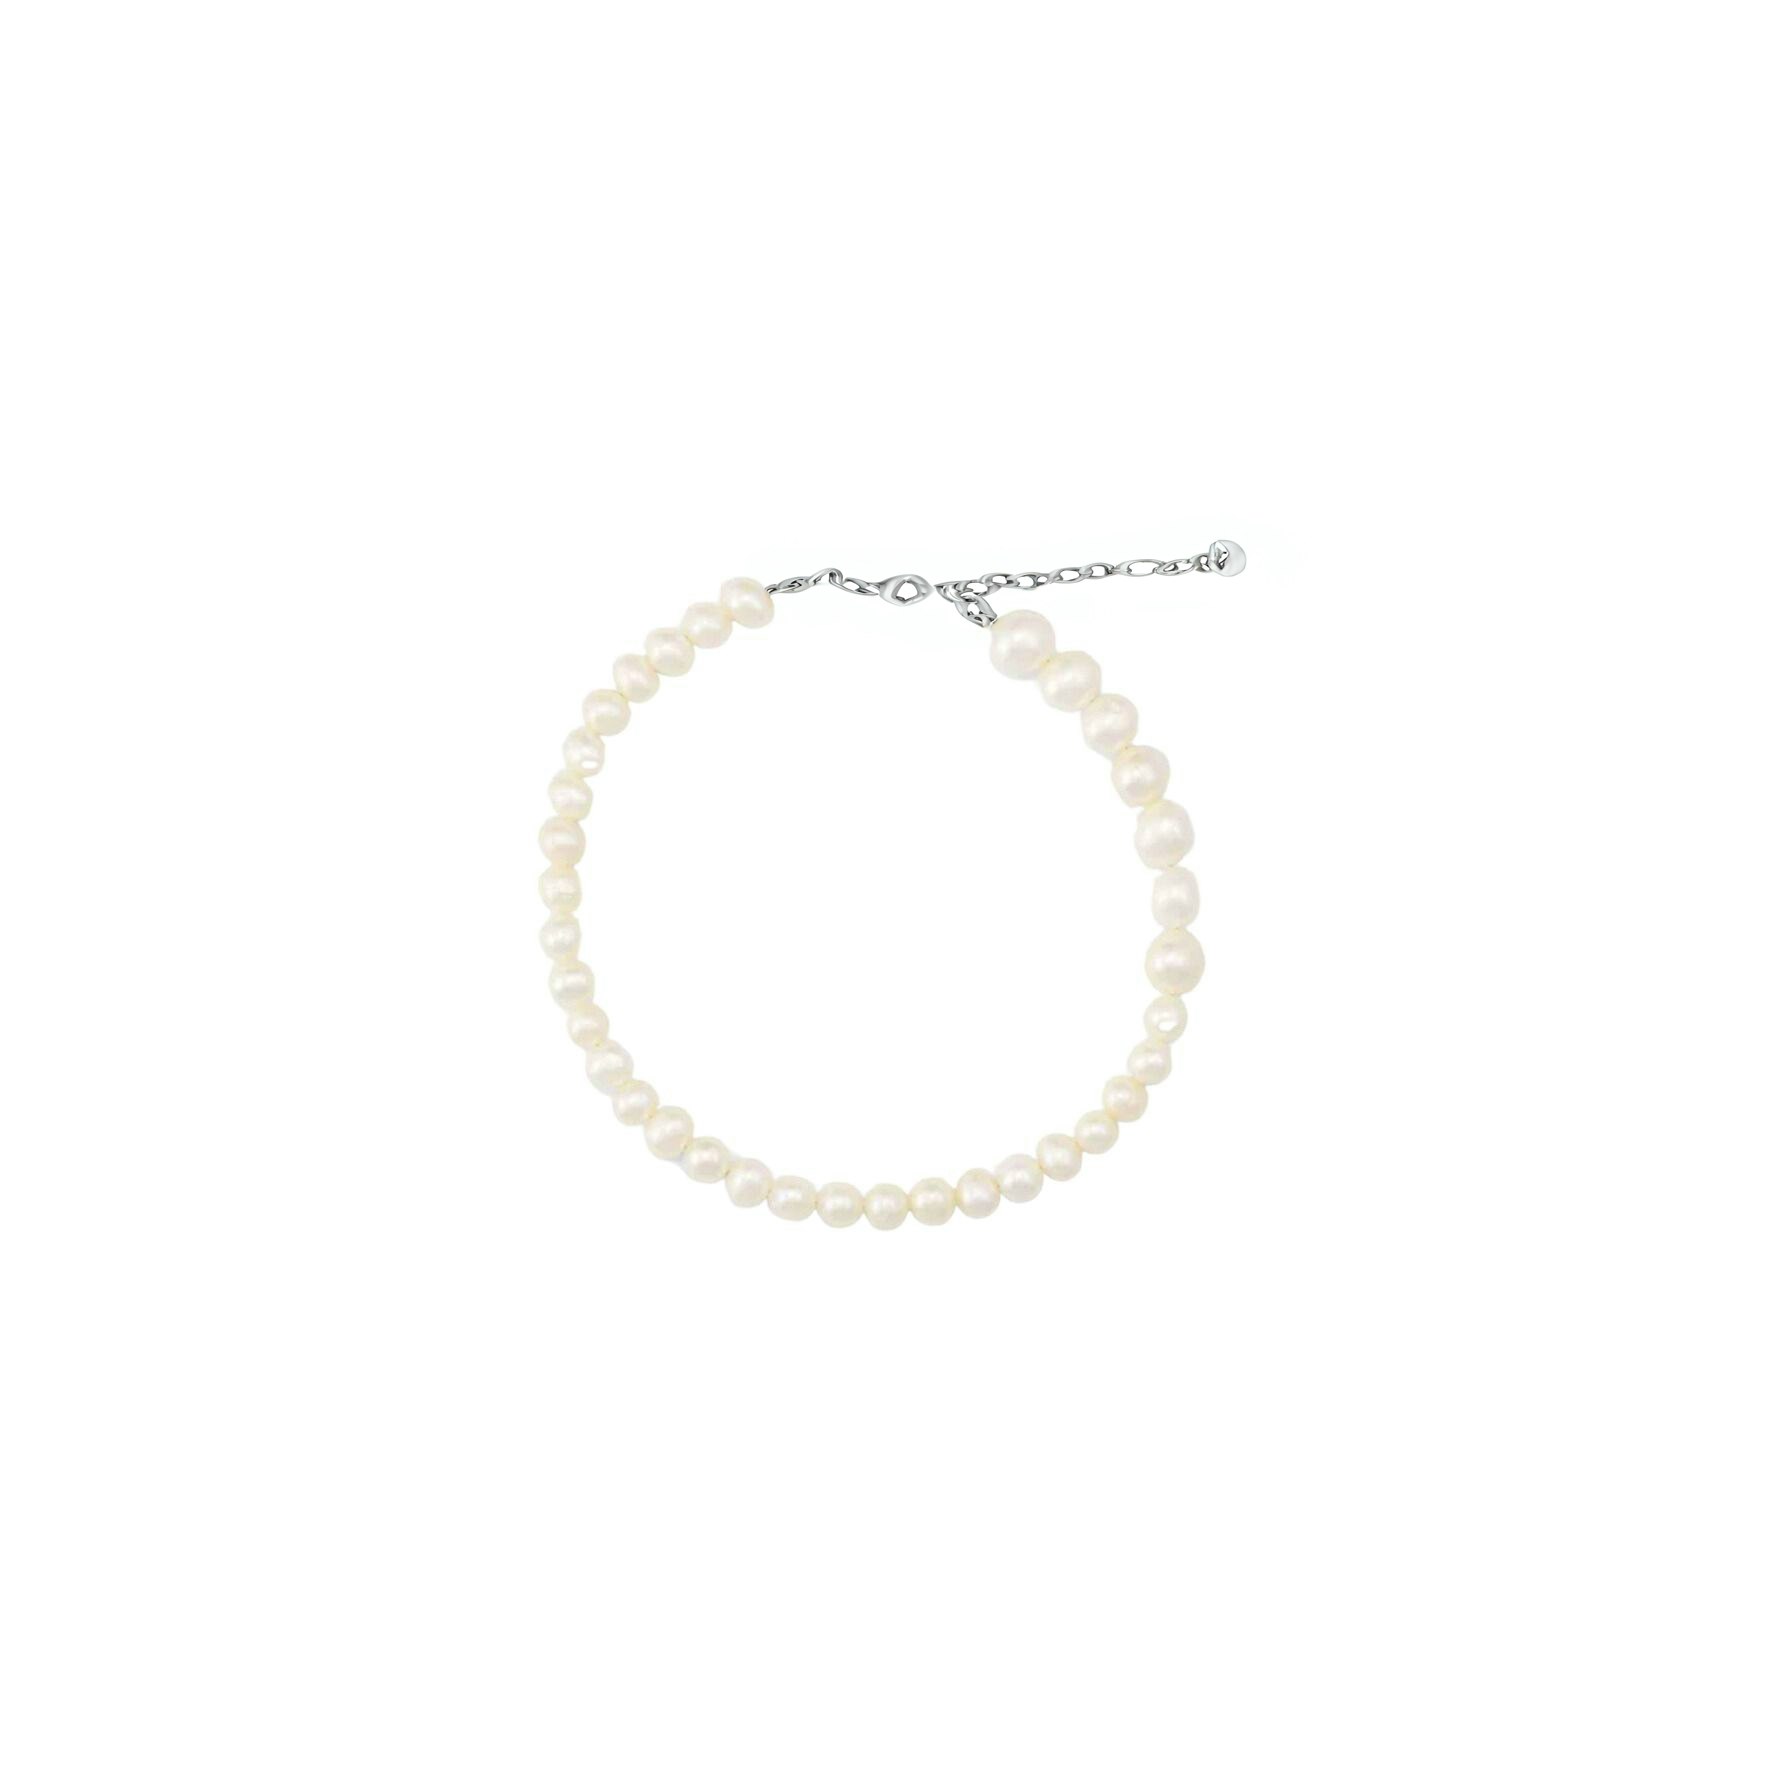 Sorelle Anklet from Sorelle Jewellery in Silver Sterling 925